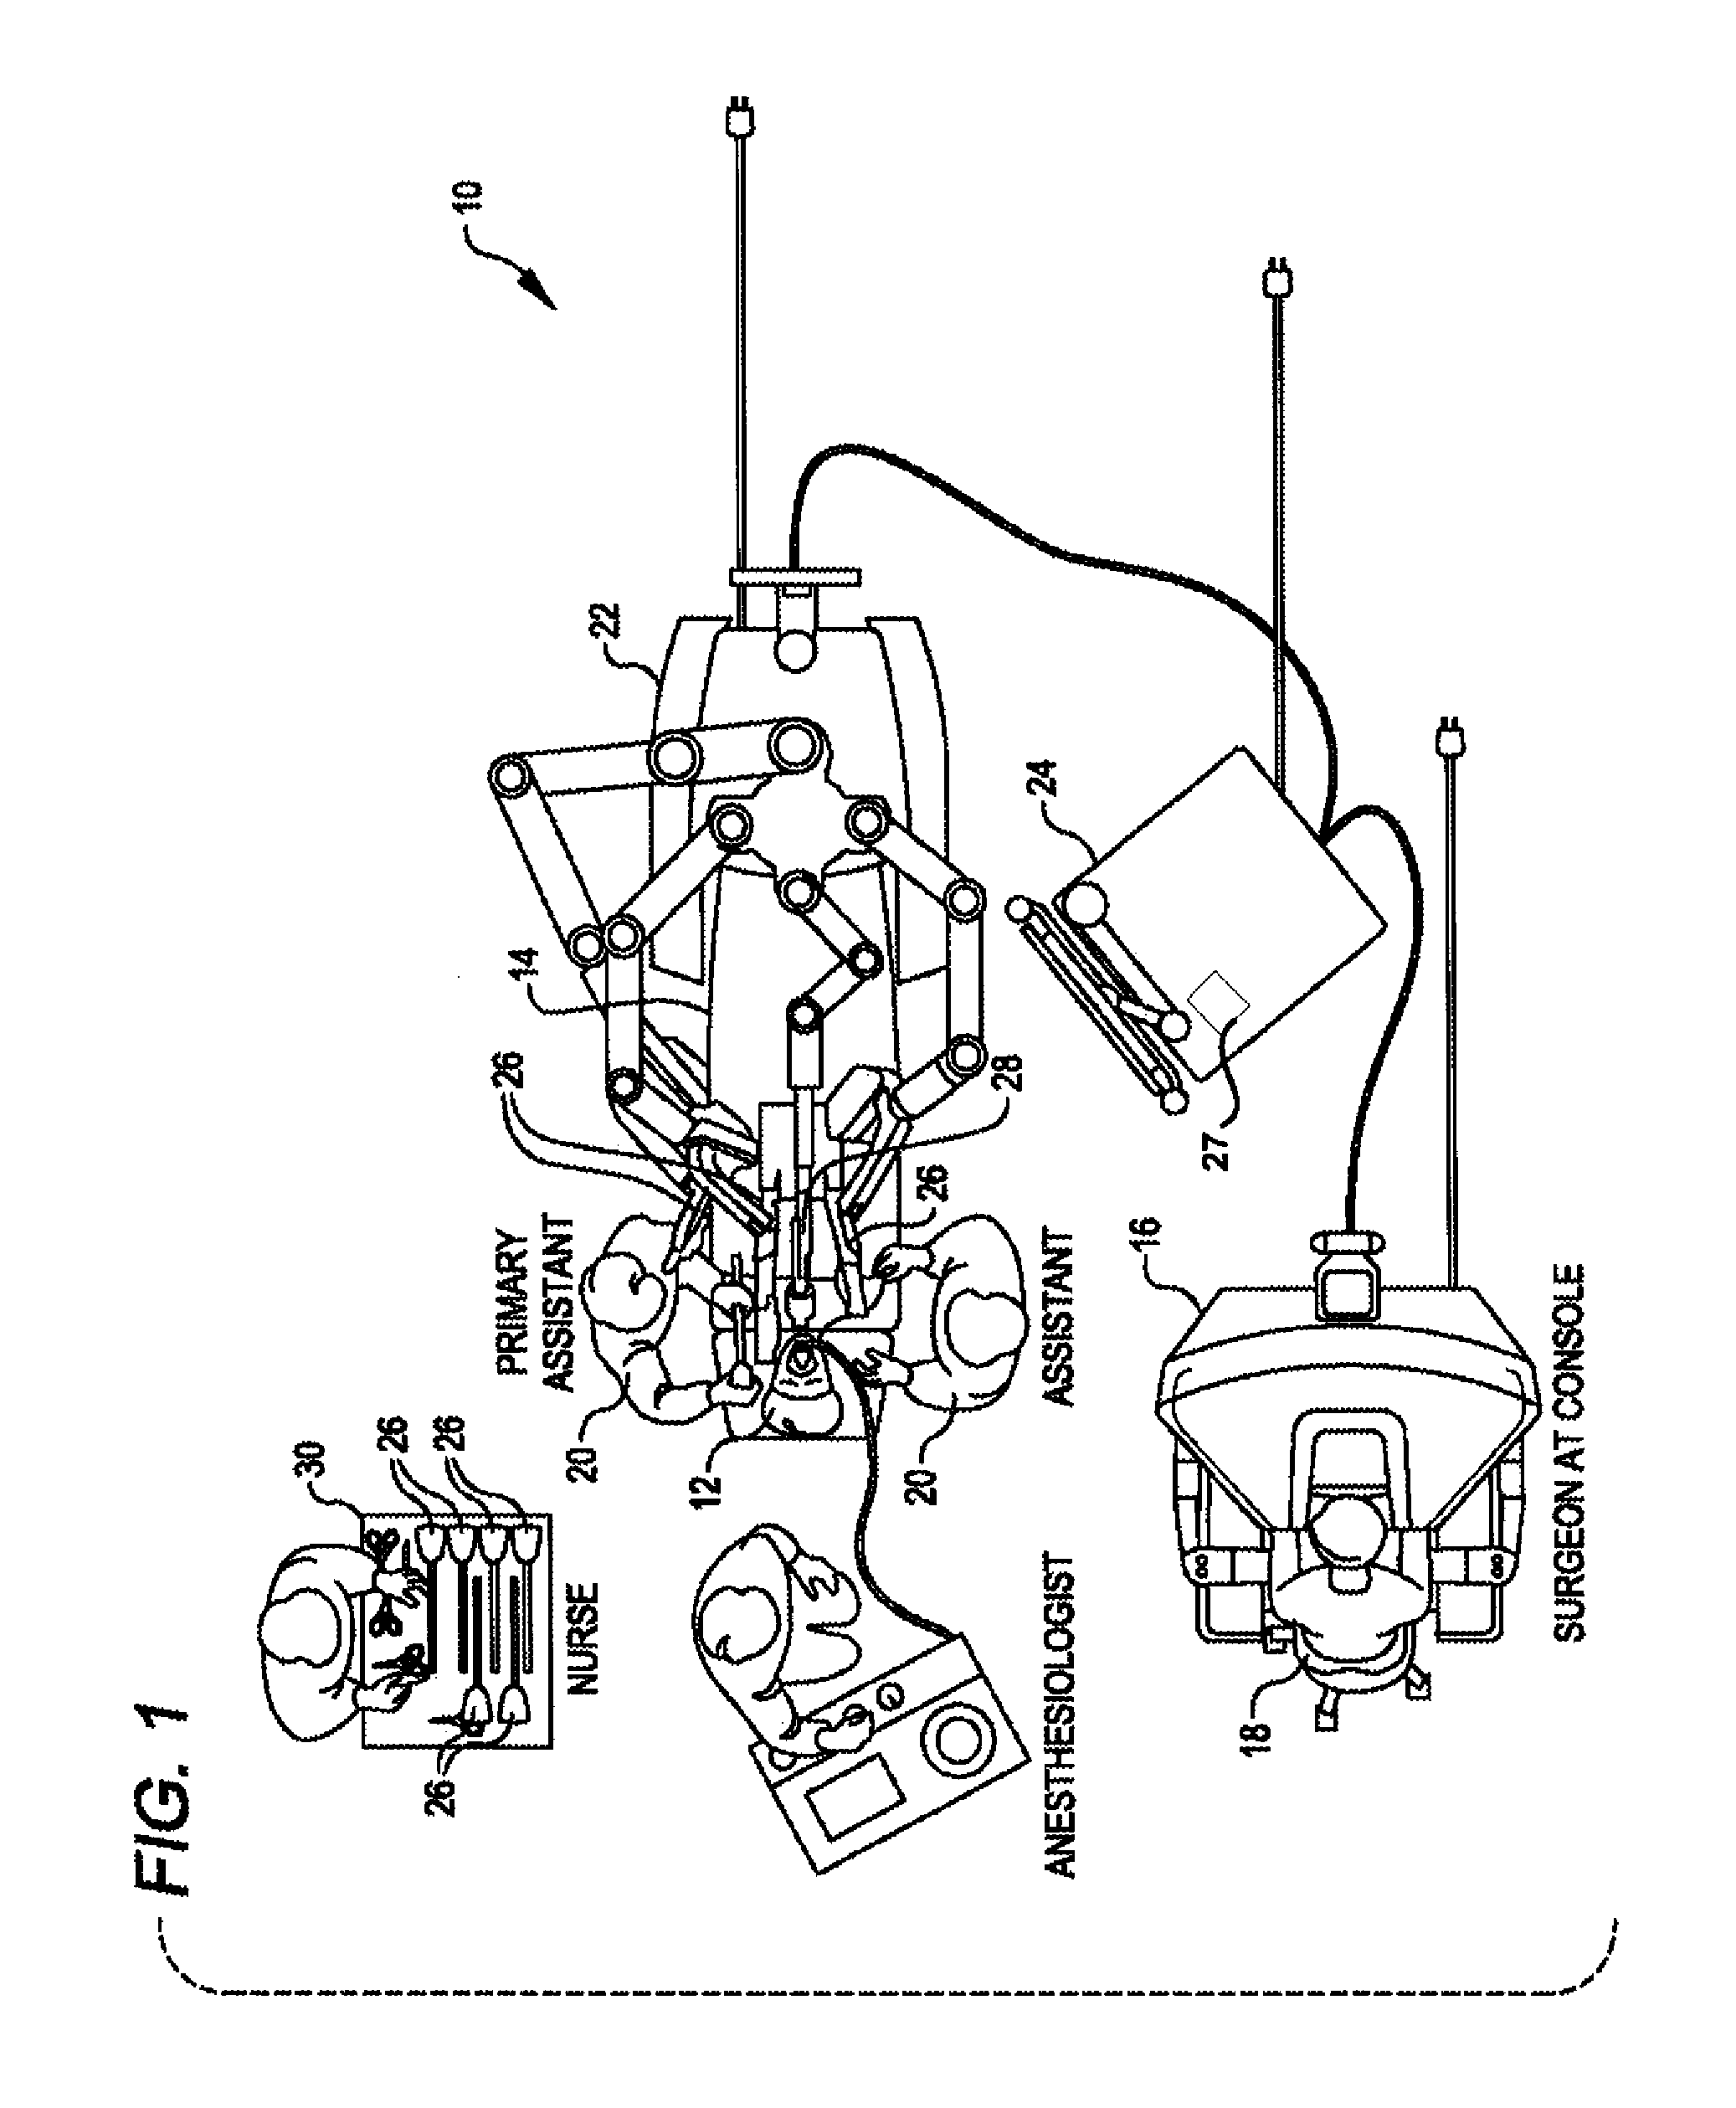 Methods and systems for detecting staple cartridge misfire or failure